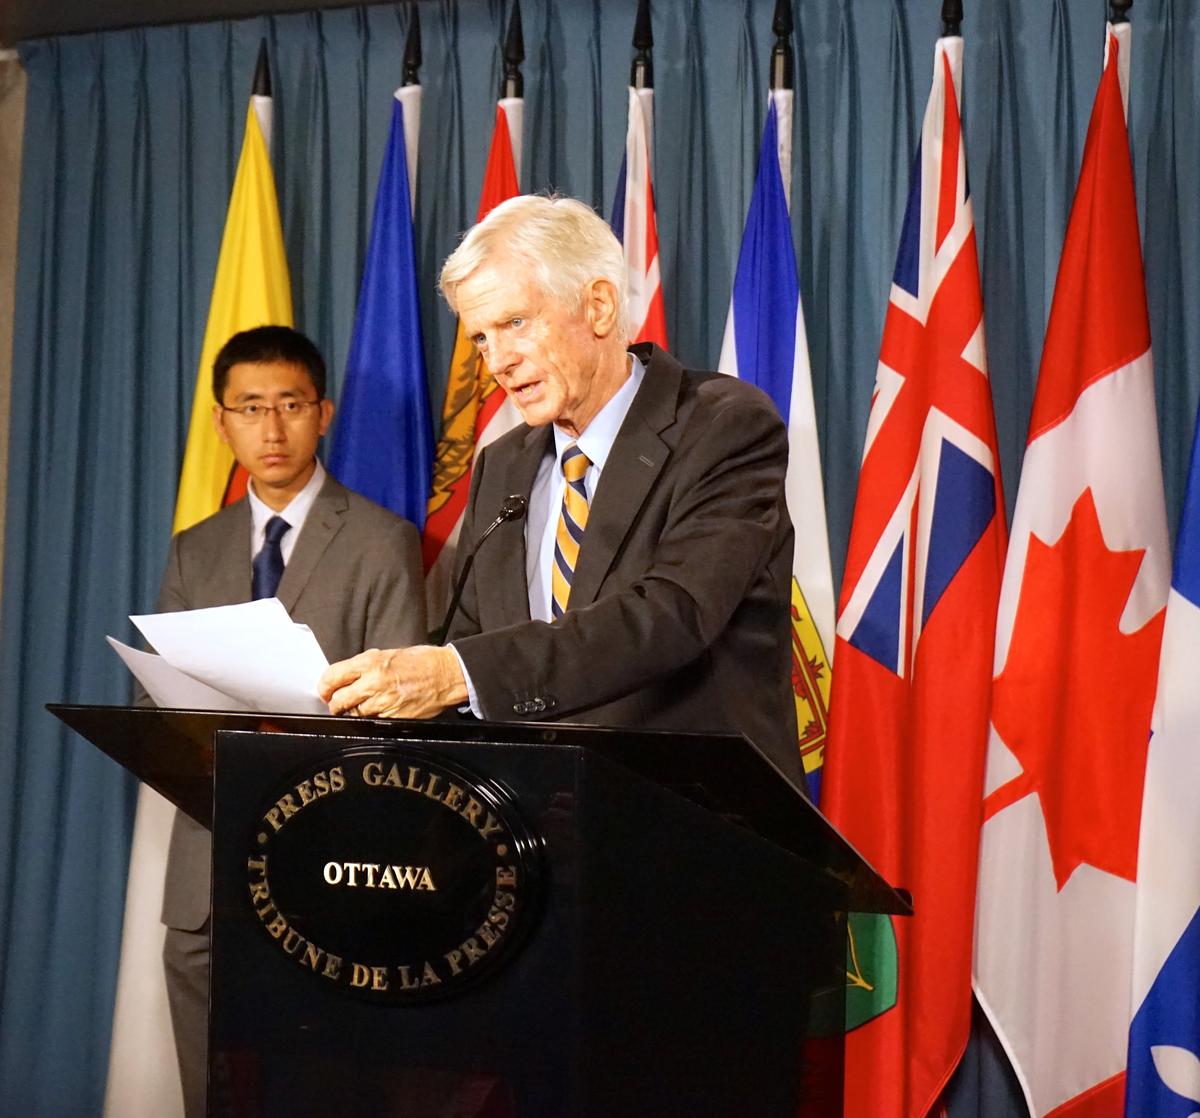 Former federal cabinet minister David Kilgour, co-author of an investigative report on organ pillaging from non-consenting prisoners of conscience in China, speaks at a press conference in Ottawa on Aug. 26, 2016, appealing to Prime Minister Justin Trudeau to urge Chinese leaders to end the persecution of Falun Gong in China. (Pam McLennan/Epoch Times)